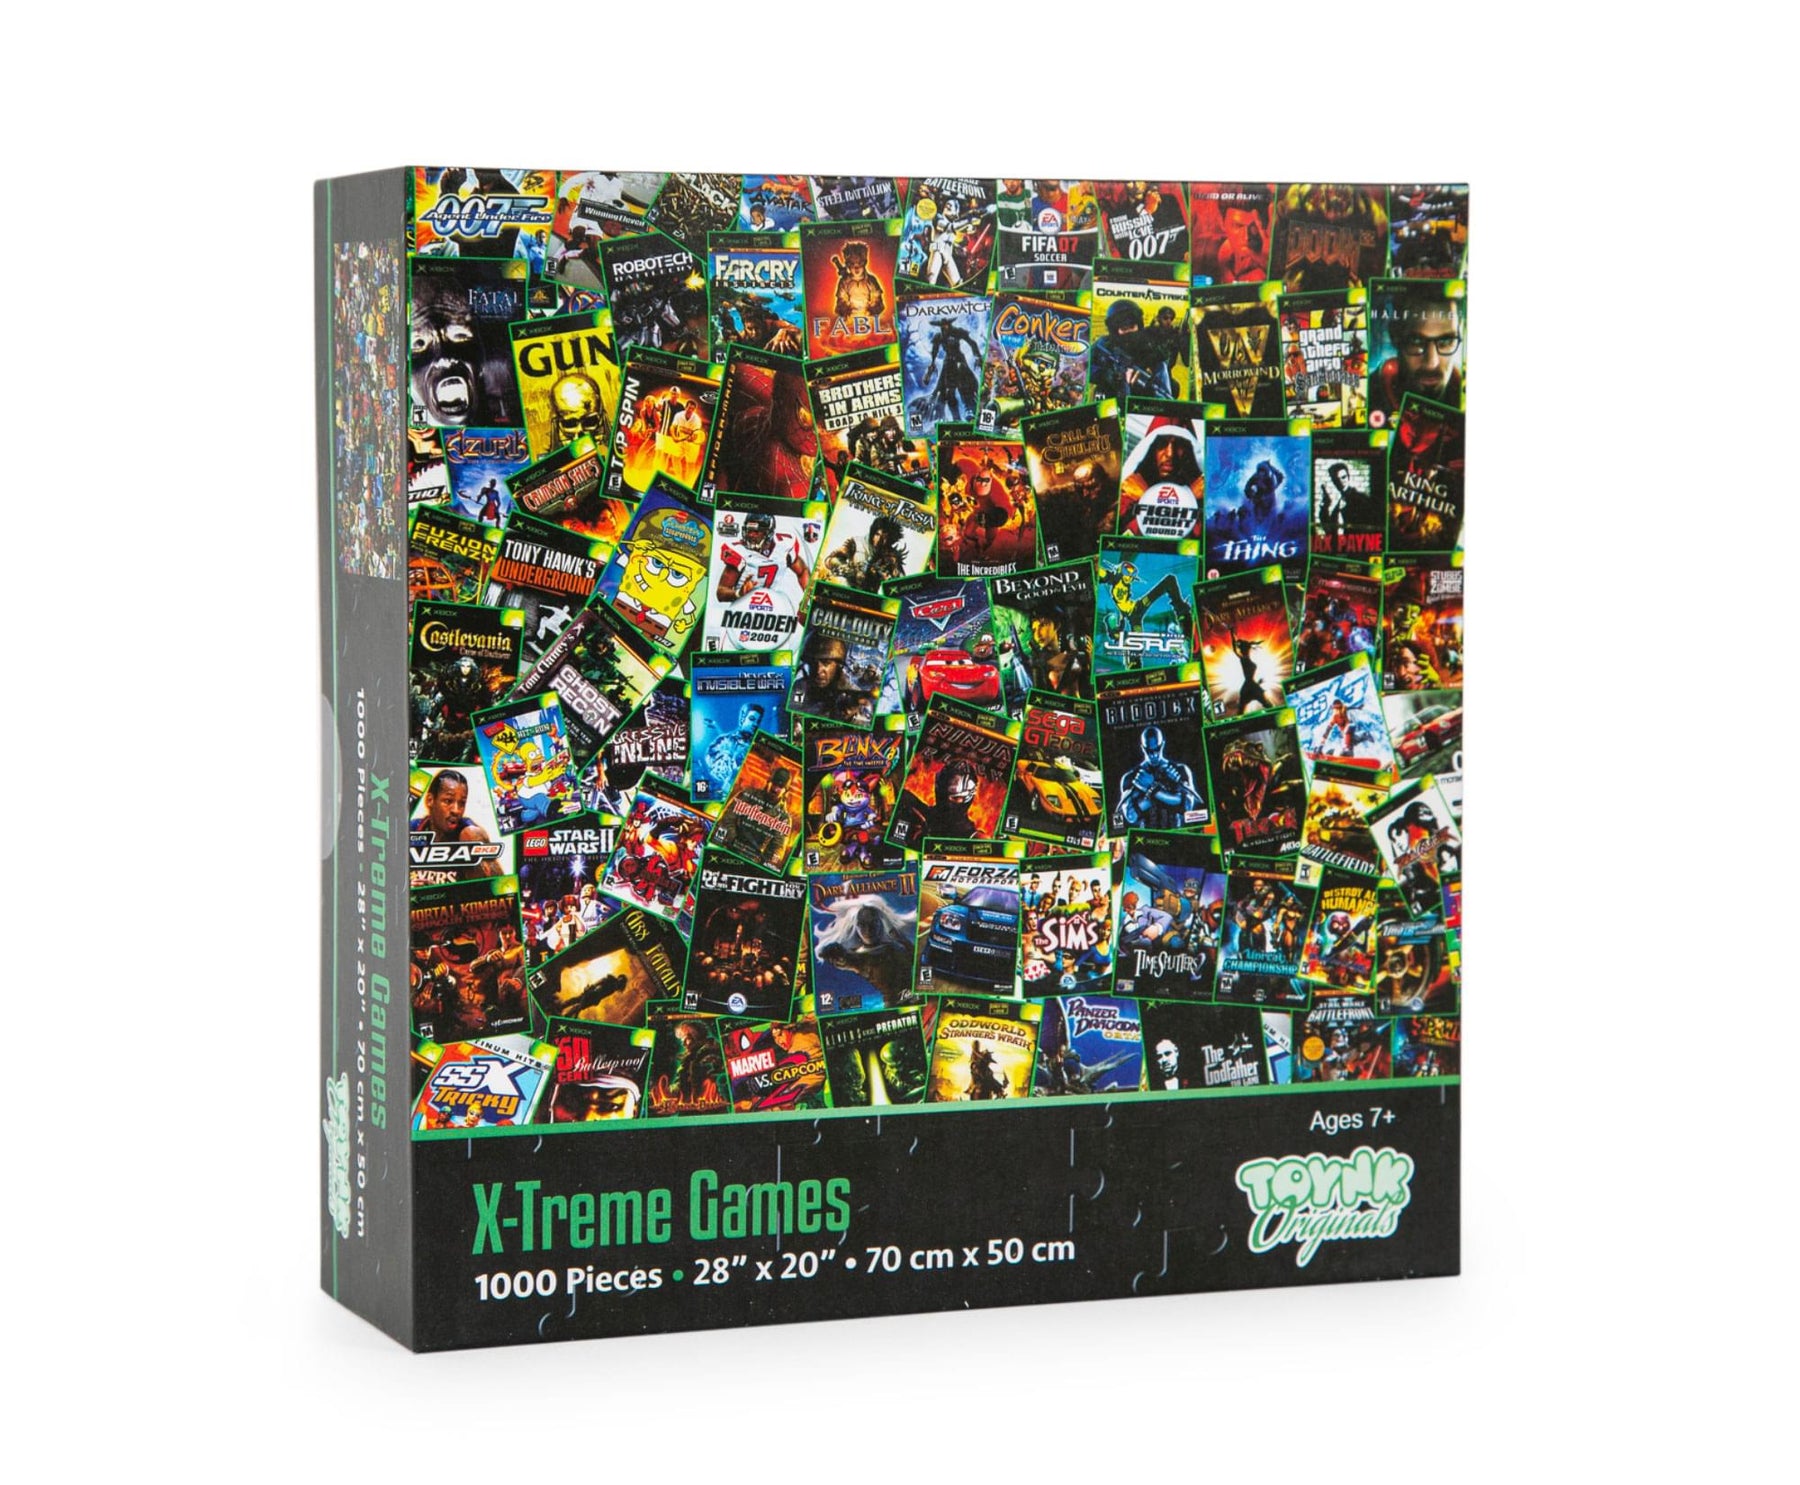 X-Treme Games Collage 1000-Piece Jigsaw Puzzle